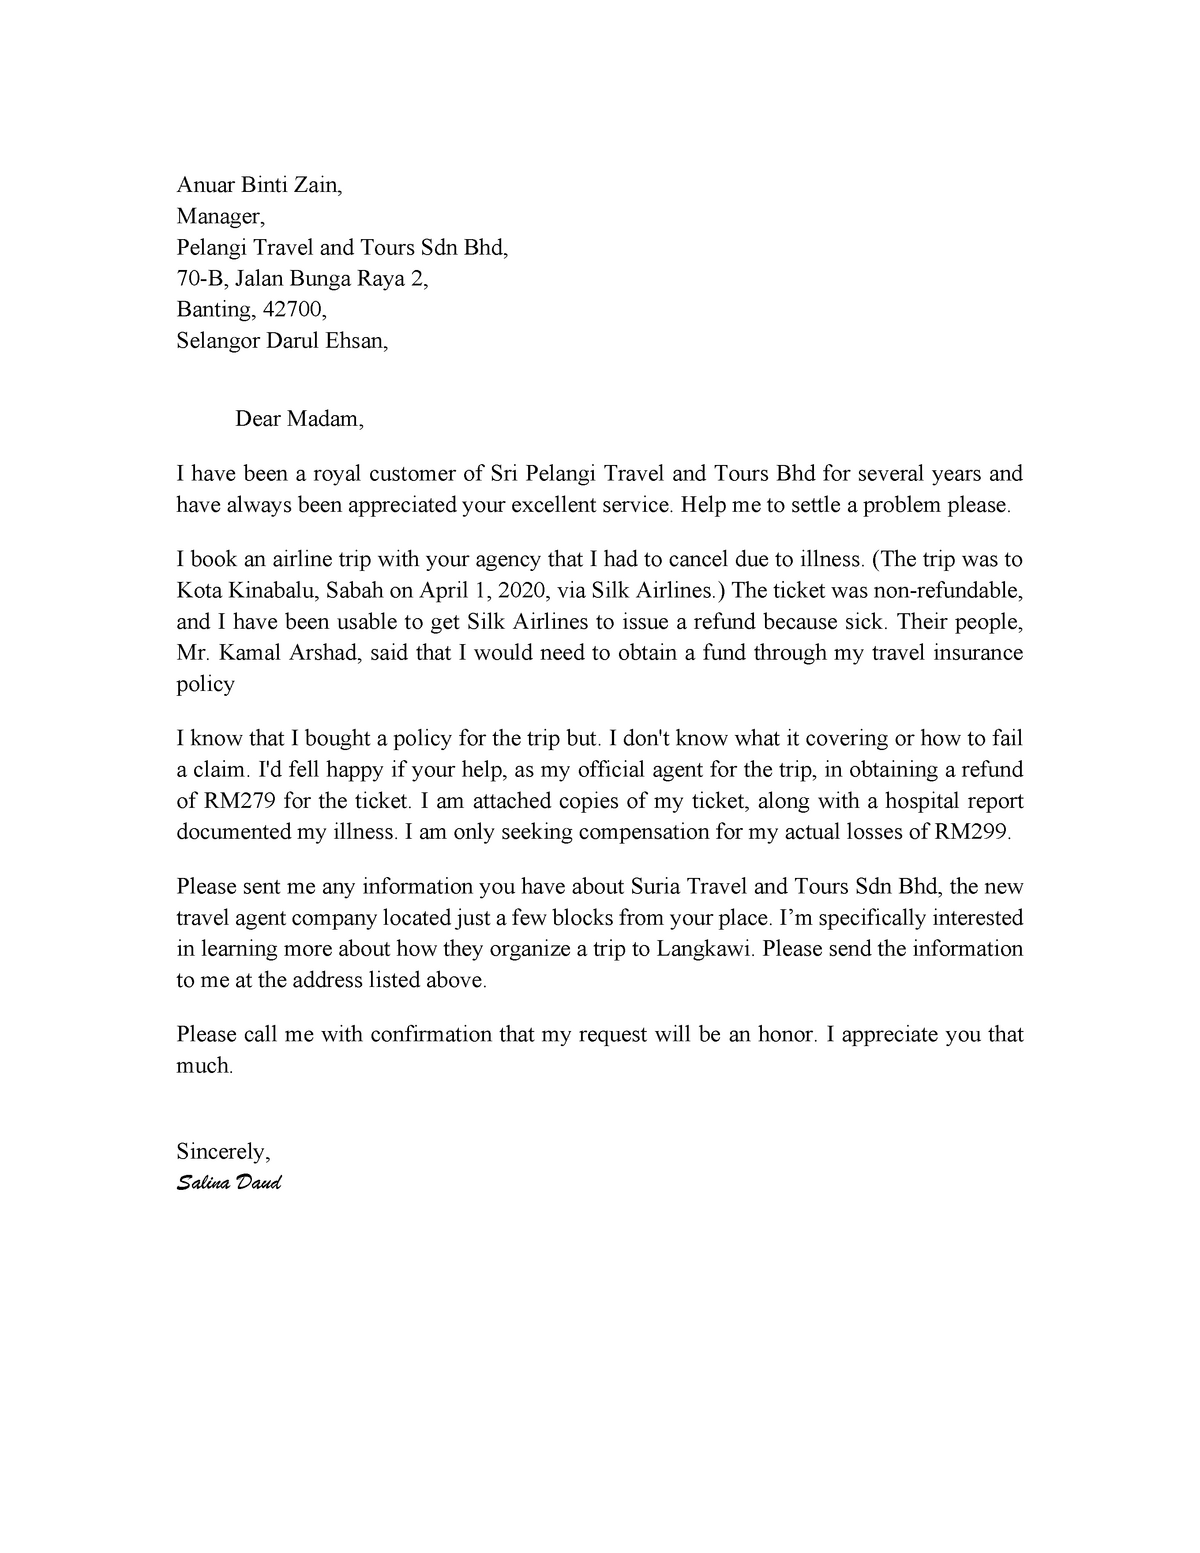 Sample Of Poorly Written Letter Poor Anuar Binti Zain Manager Pelangi Travel And Tours Sdn 5488